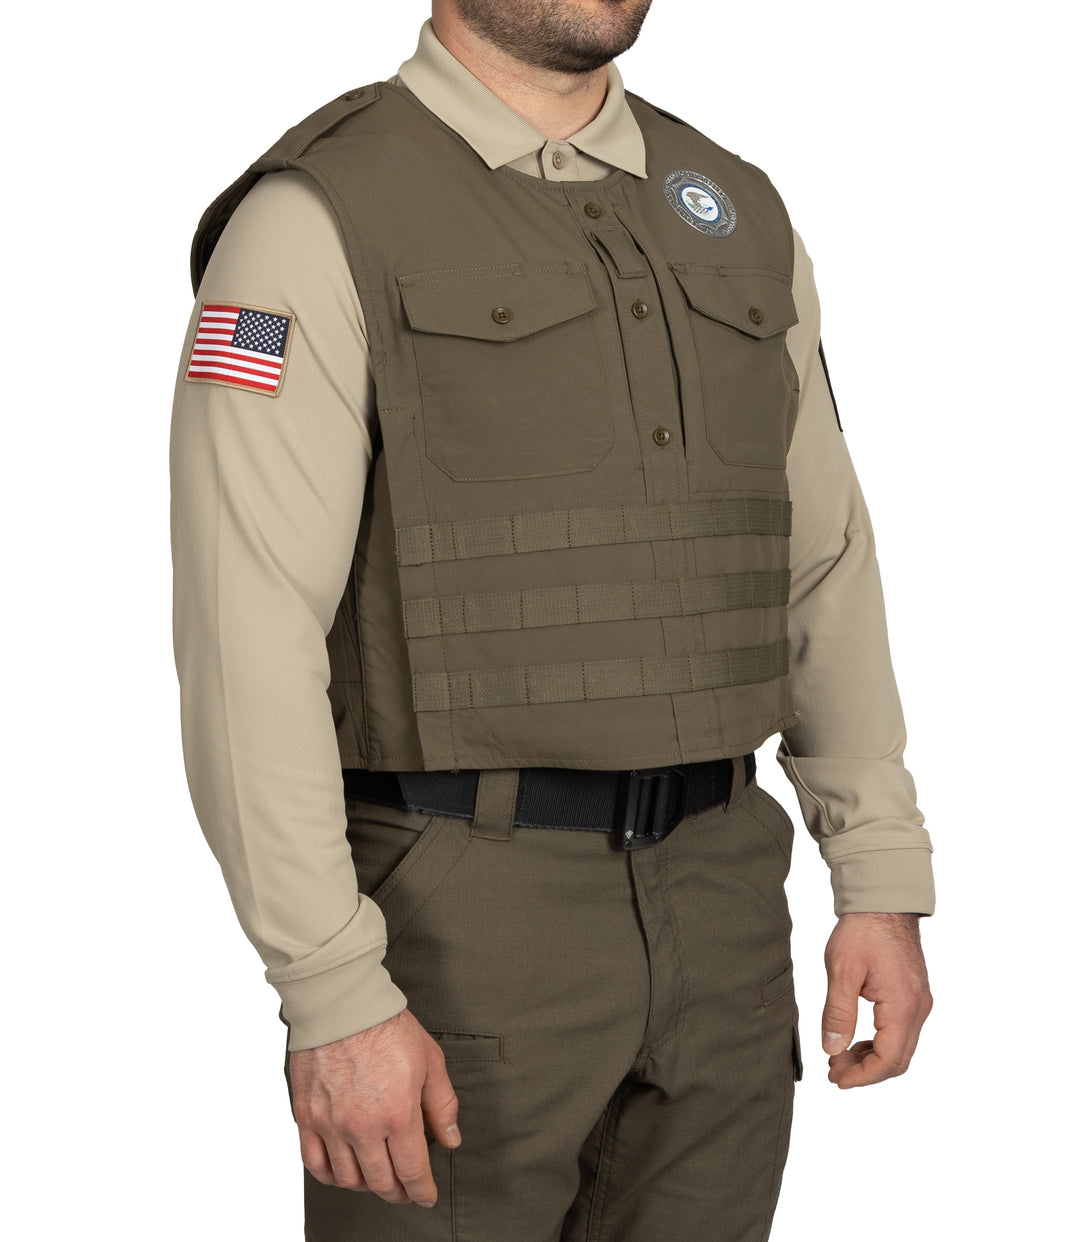 PRO DUTY™ Armor Cover with MOLLE